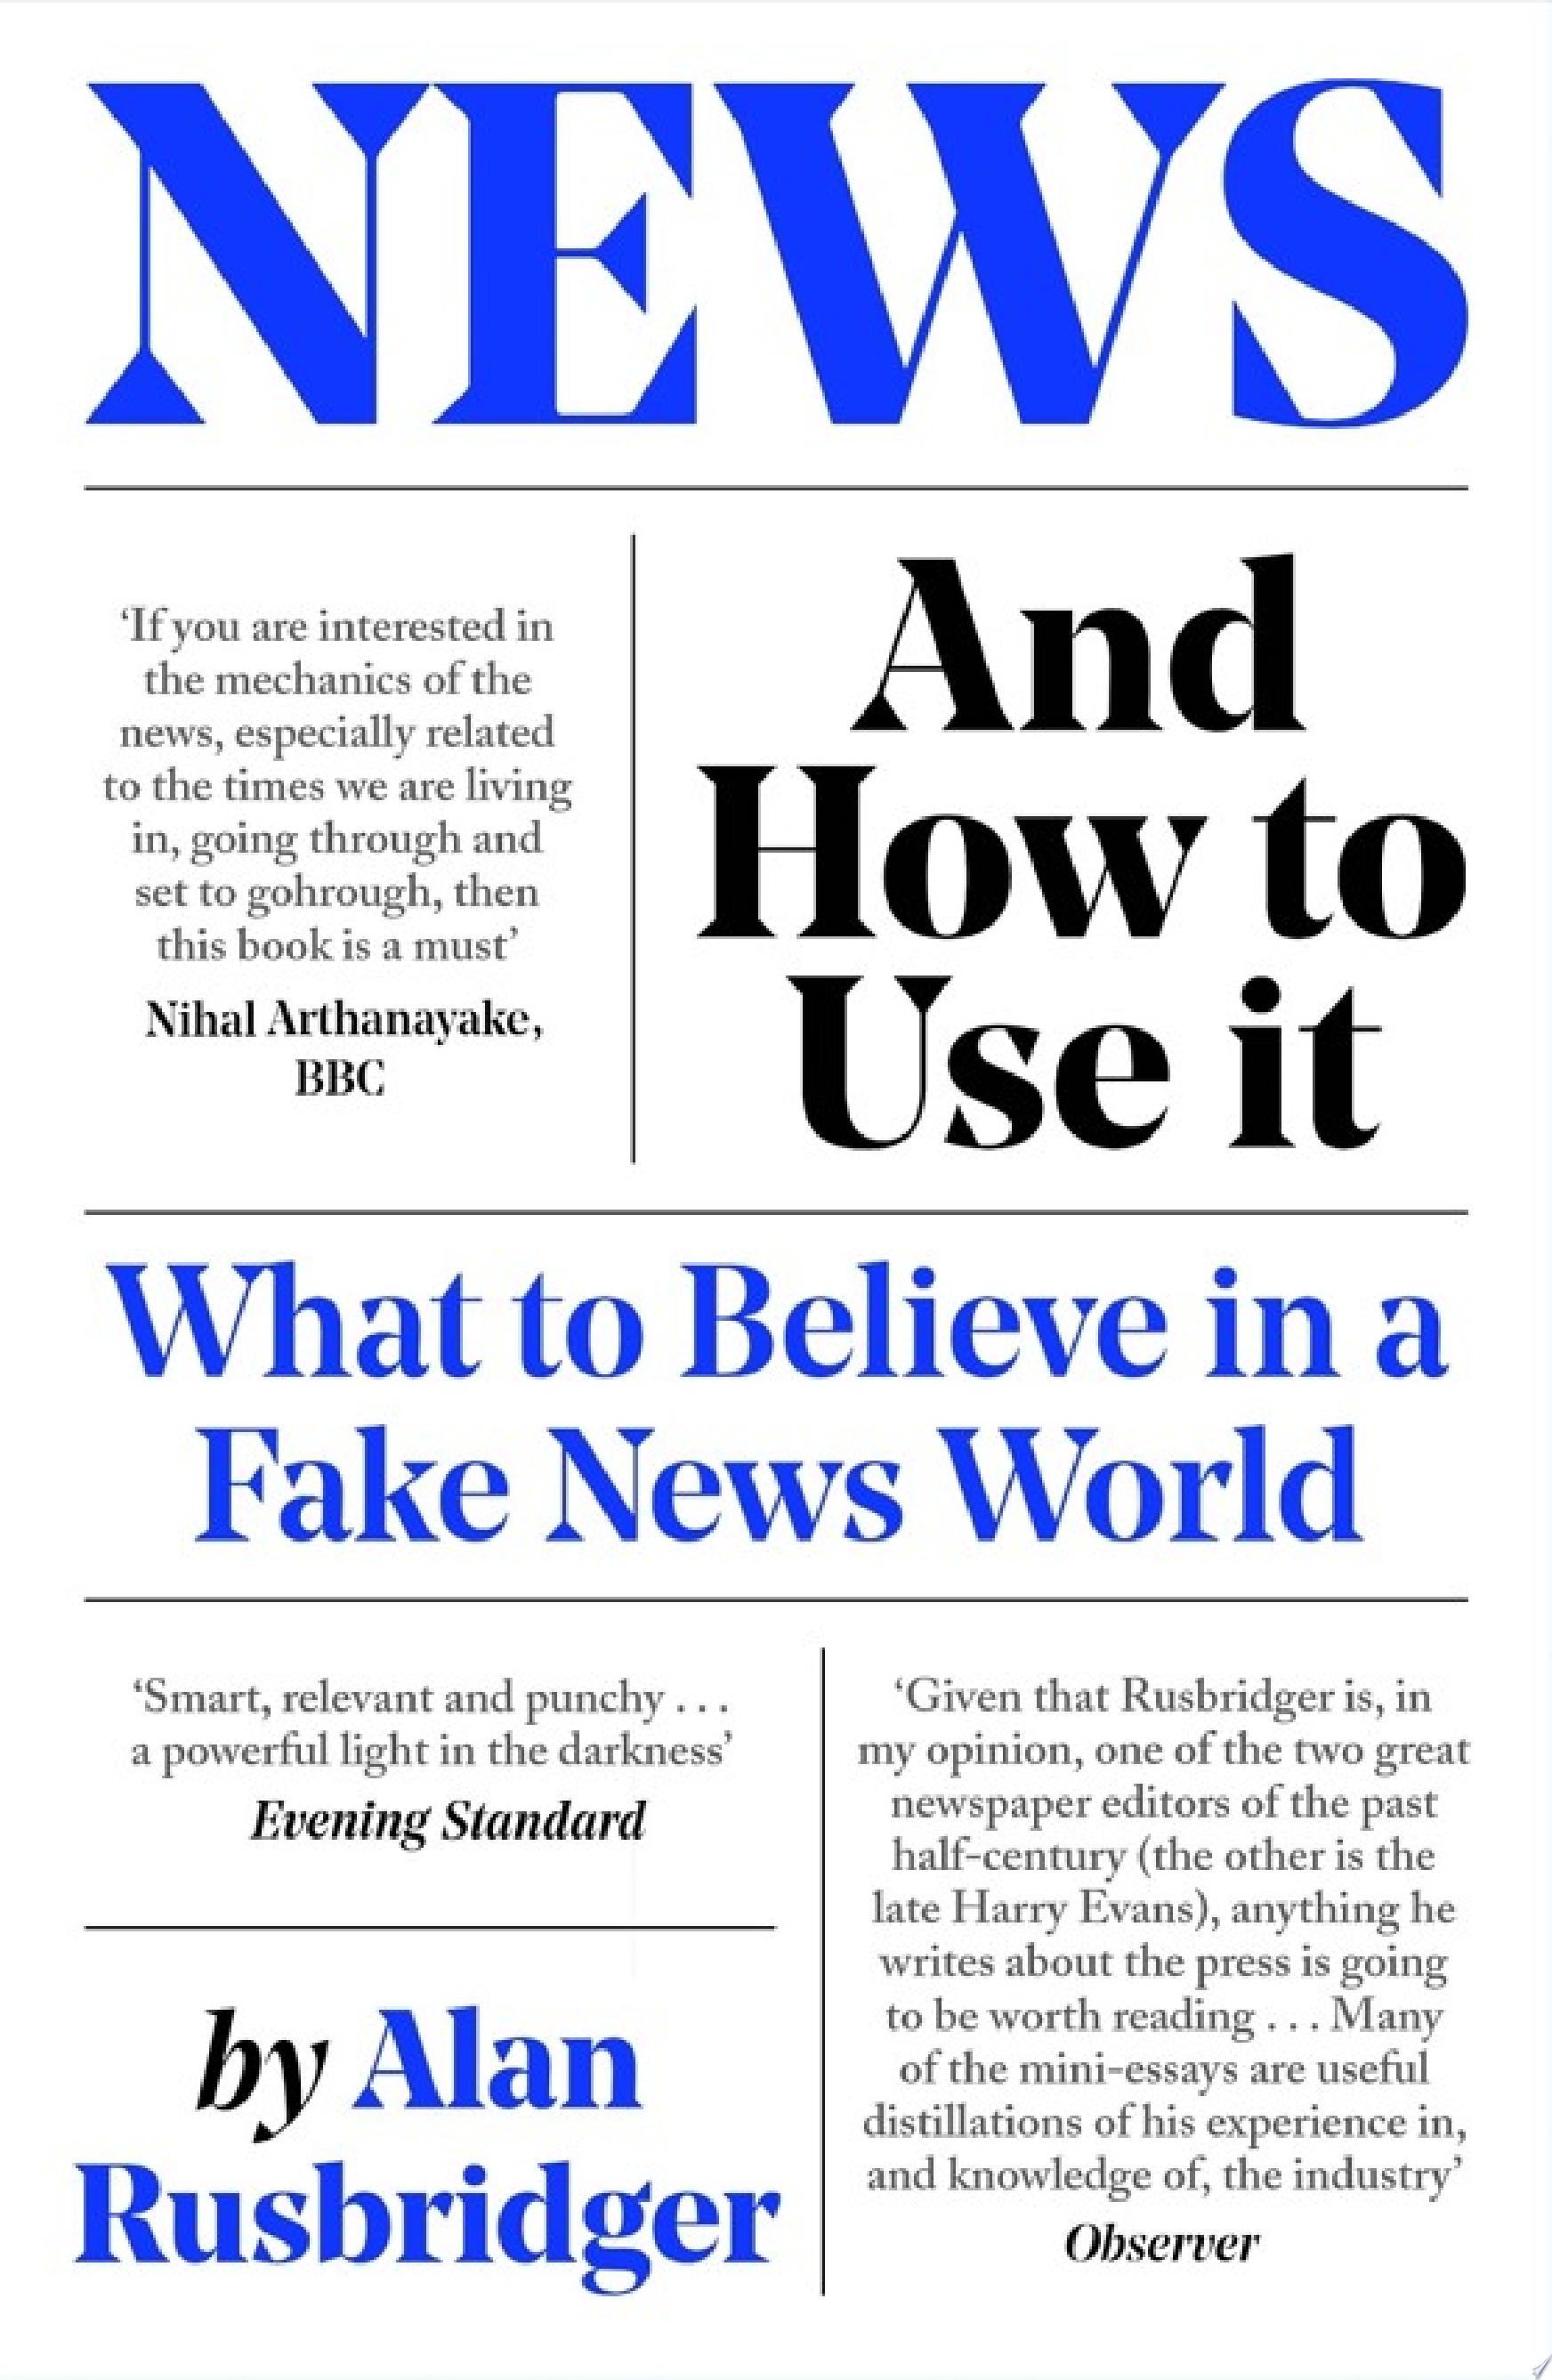 Image for "News and How to Use It"